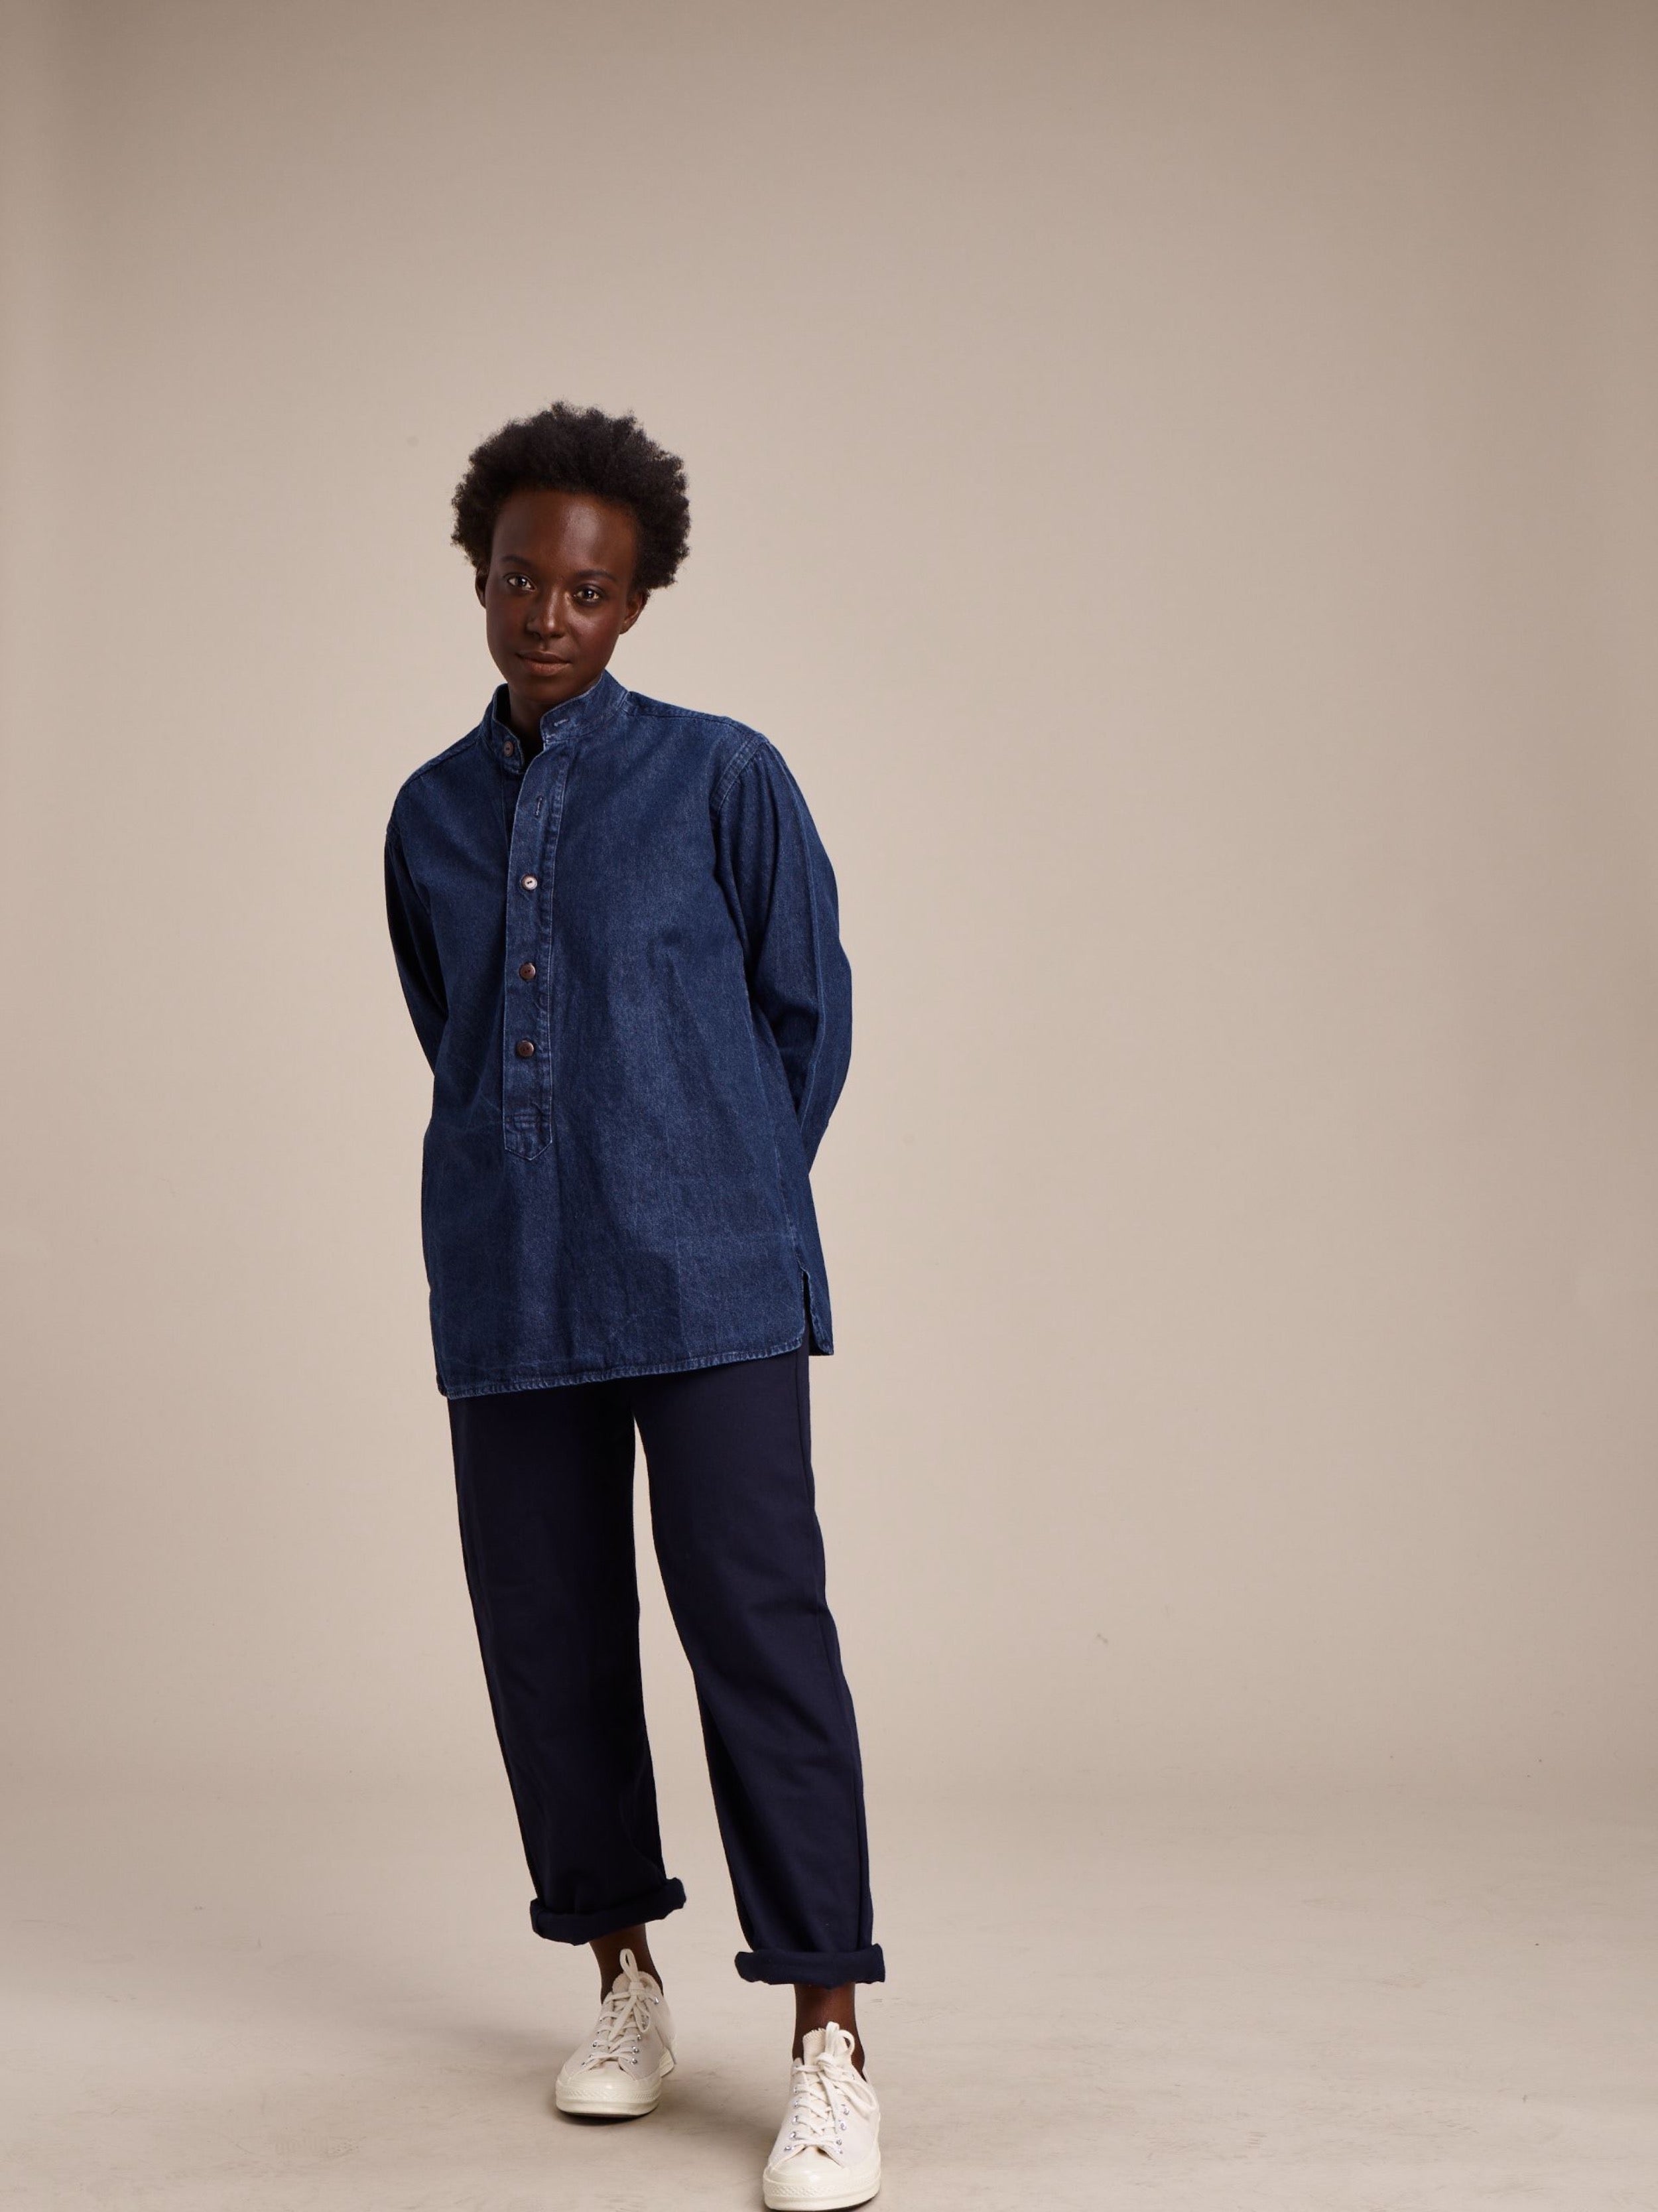 Woman wearing Carrier Company Women's Work Trouser in Navy and Denim Work Shirt